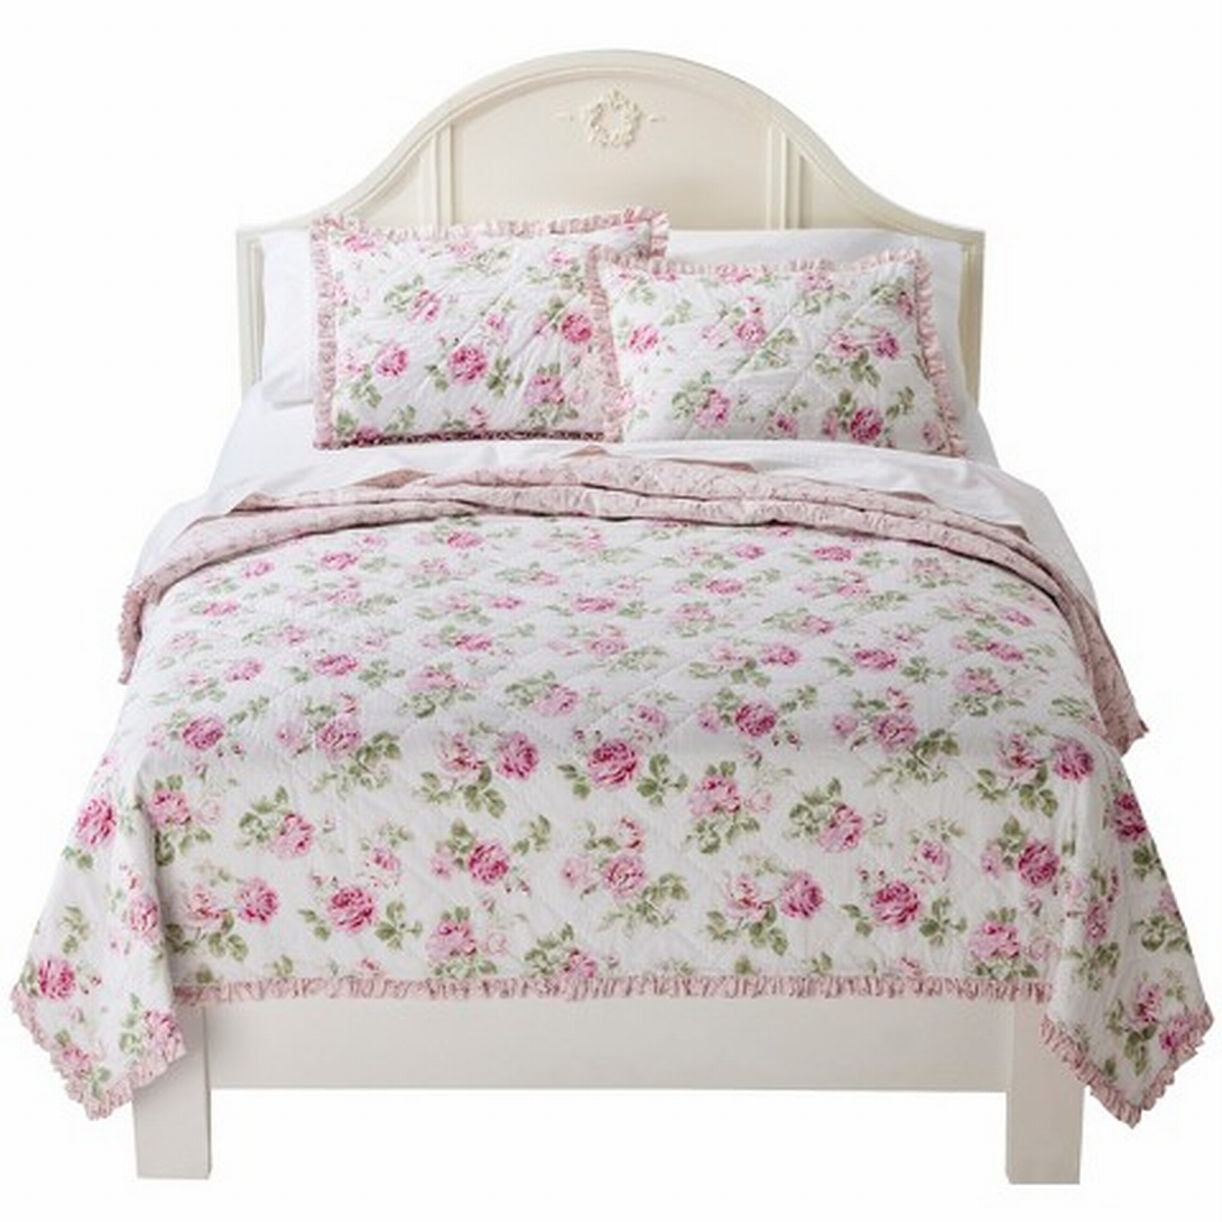 simply shabby chic bedroom furniture